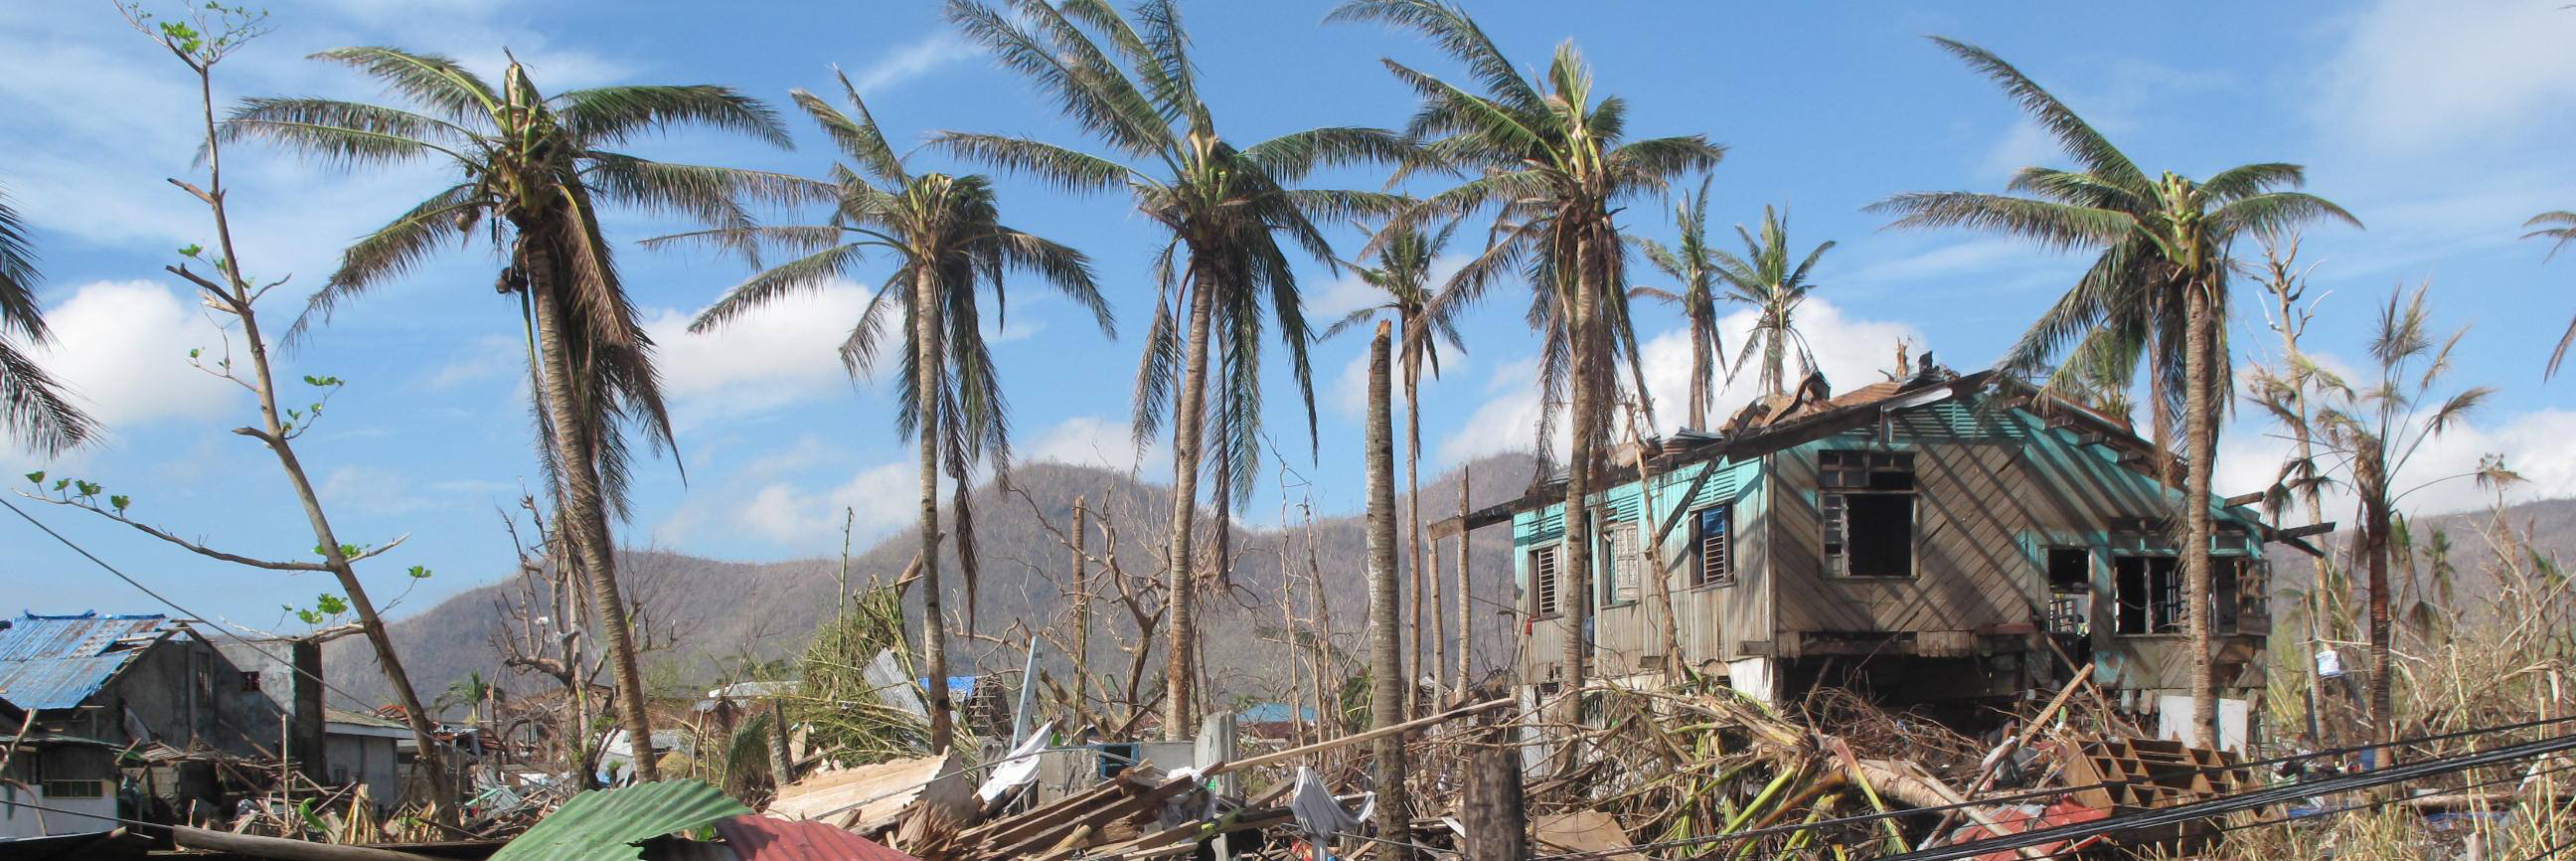 A few palm trees stand near destroyed homes amid the destruction caused by Typhoon Haiyan in 2013 in the city of Tacloban, Philippines